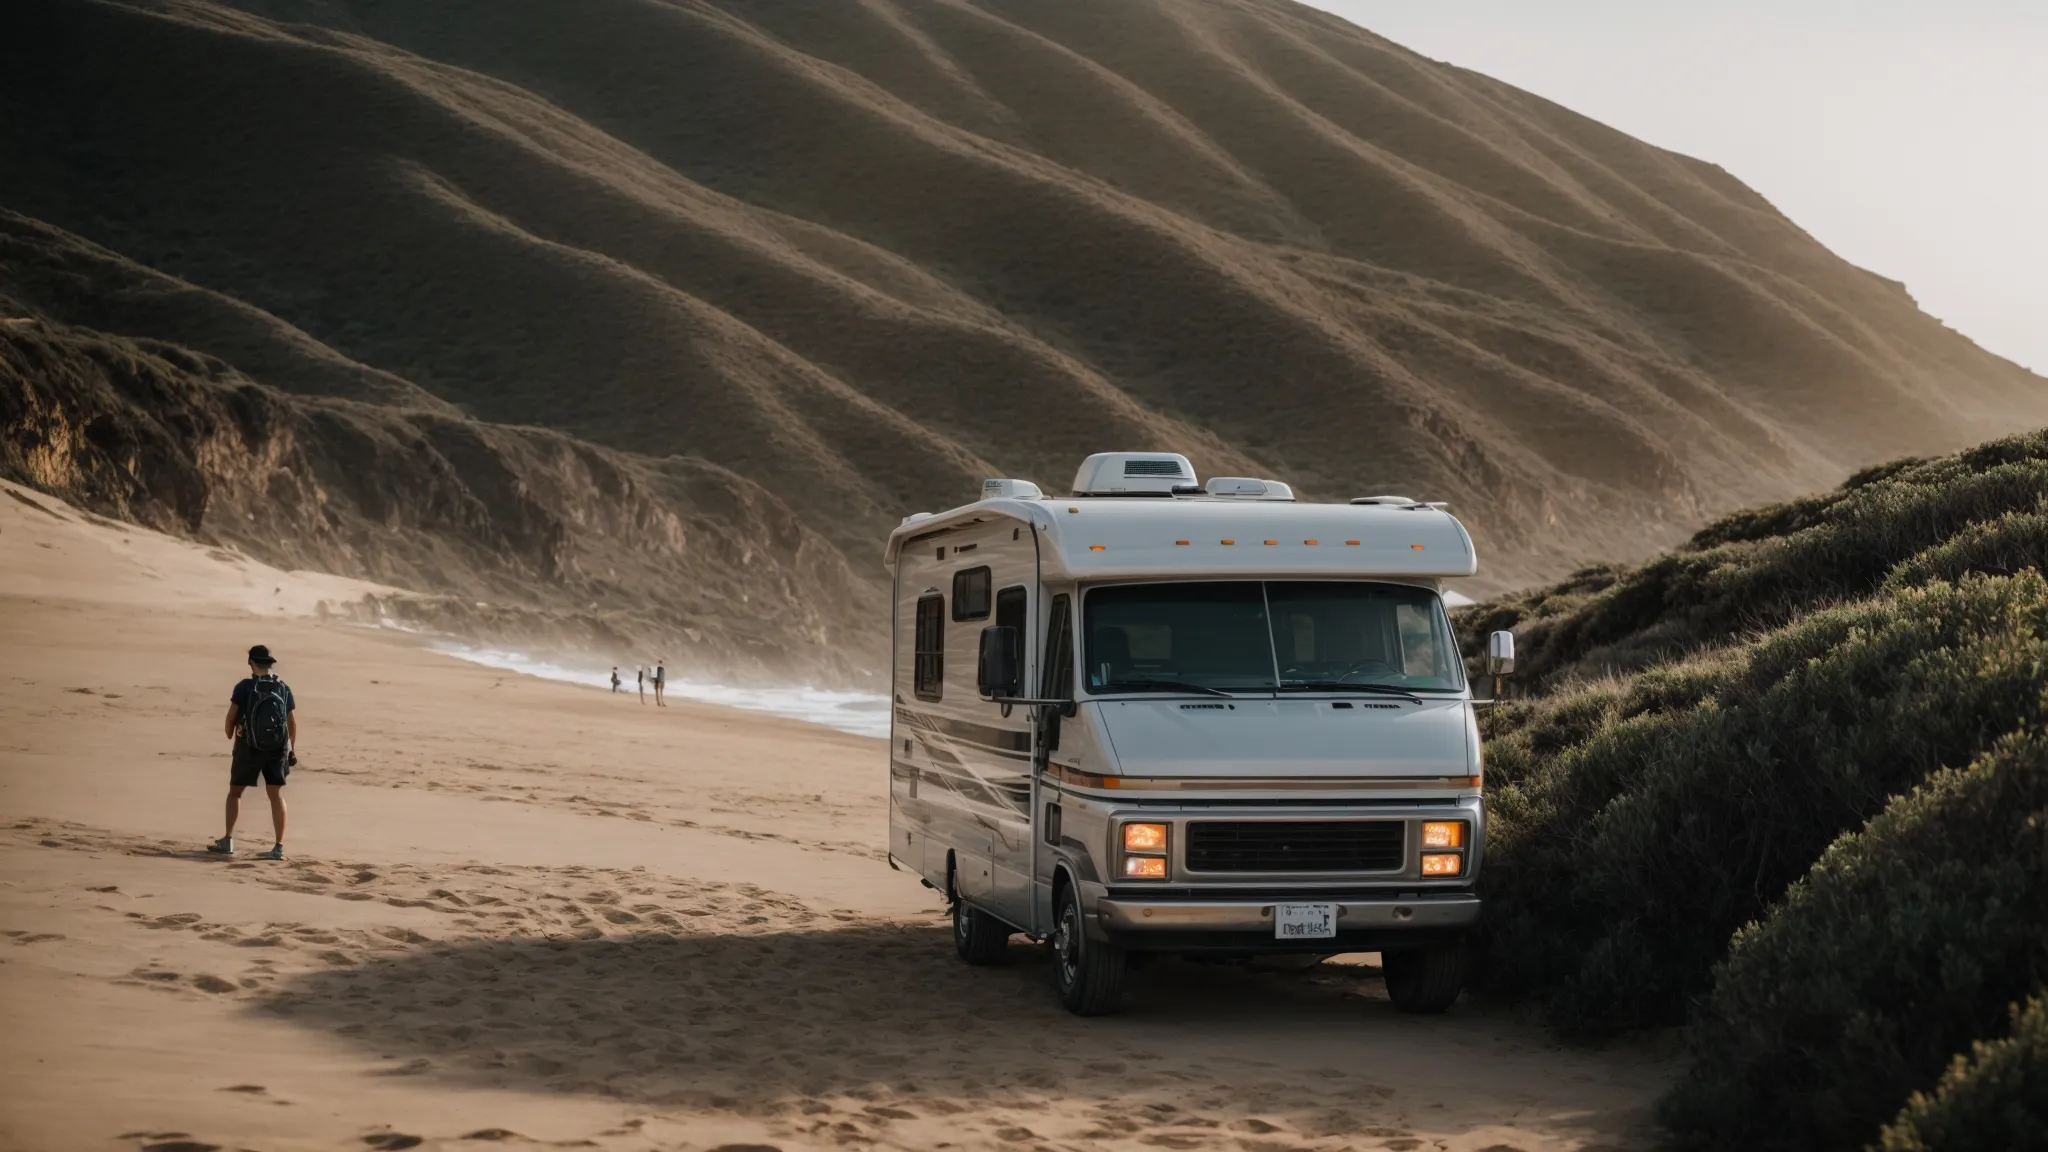 an rv parked near the beach with surfers catching waves as hikers explore trails in the nearby hills.